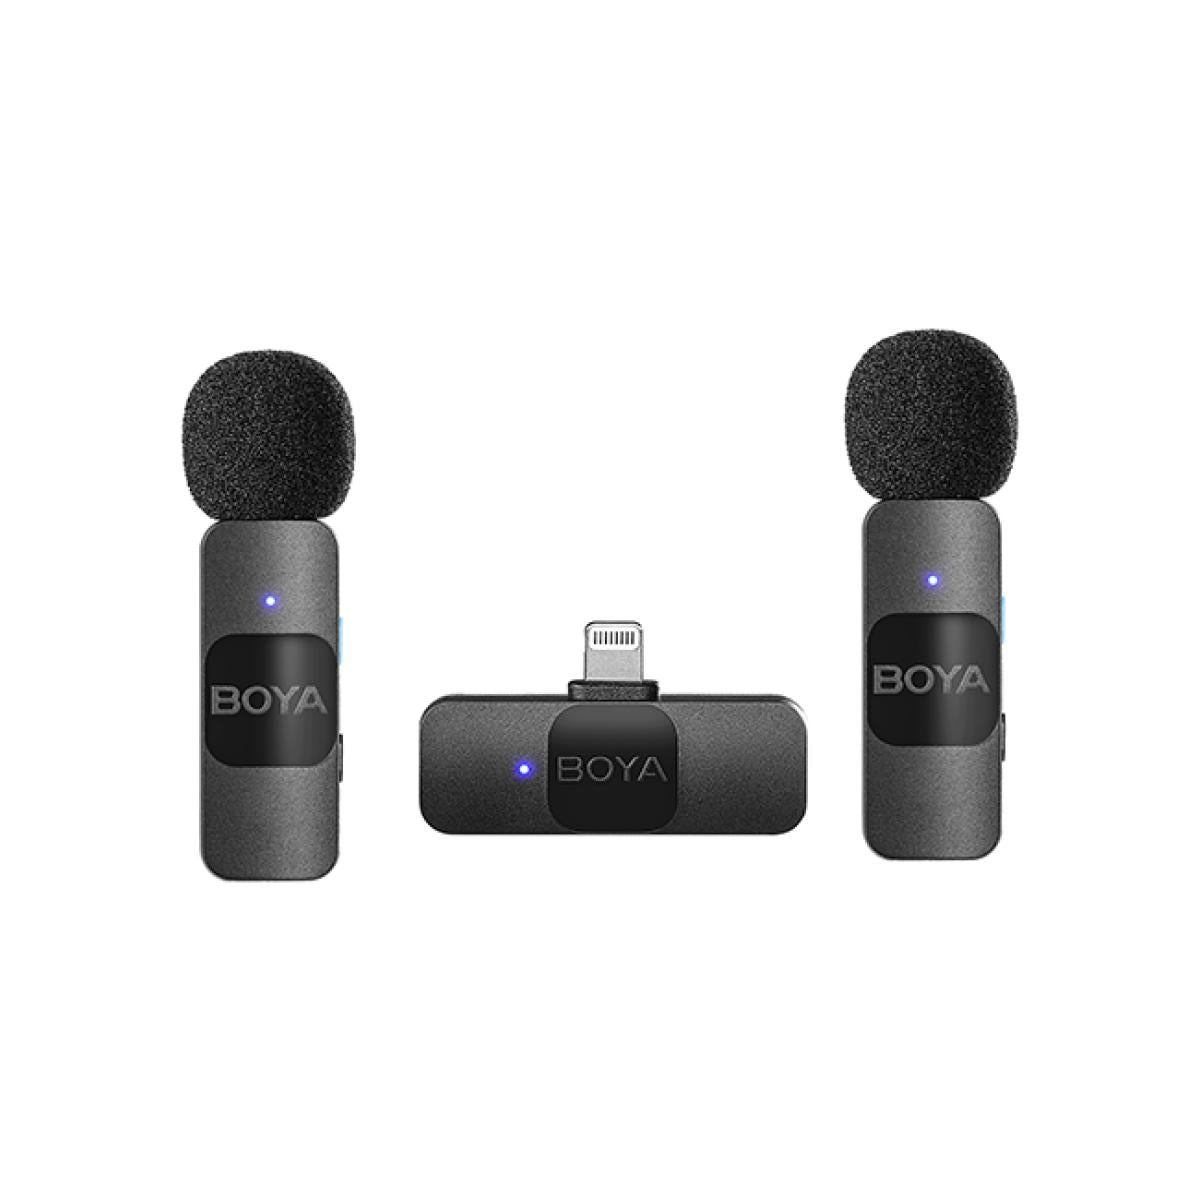 BOYA Ultracompact 2.4GHz Wireless Microphone System for iPhone (Two MIc) - Black